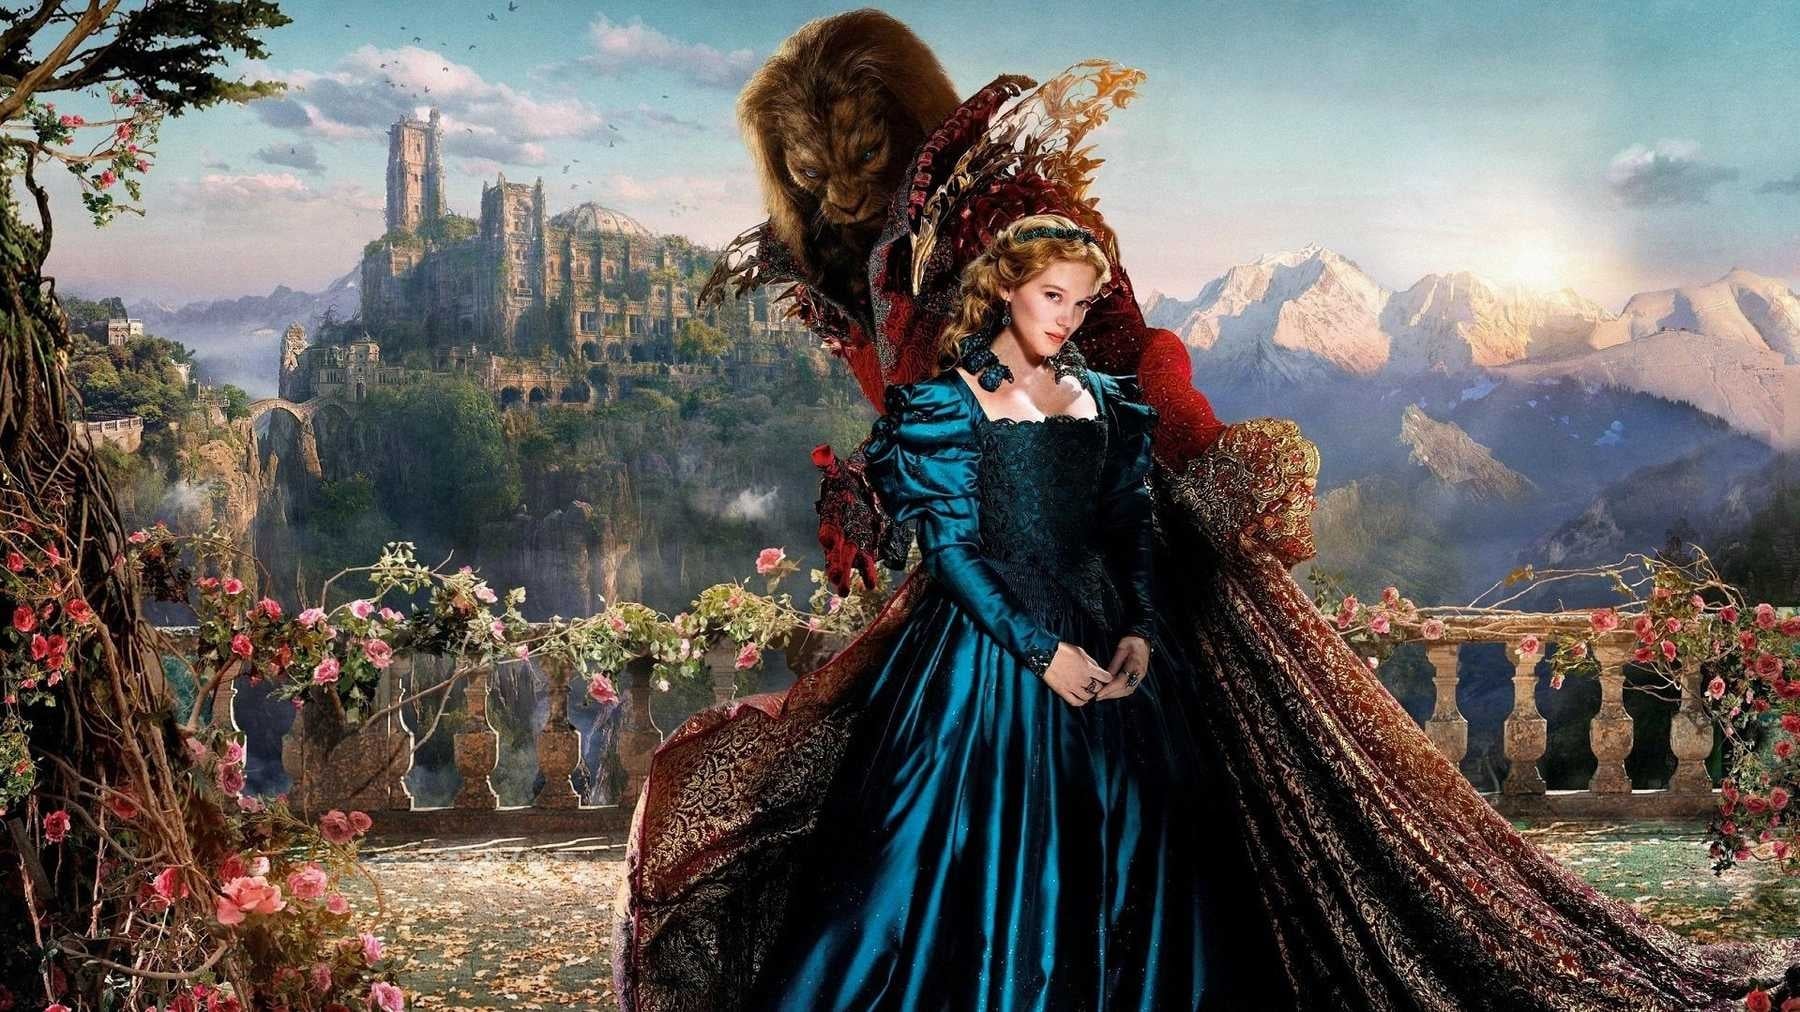 Beauty and the Beast 2014 123movies